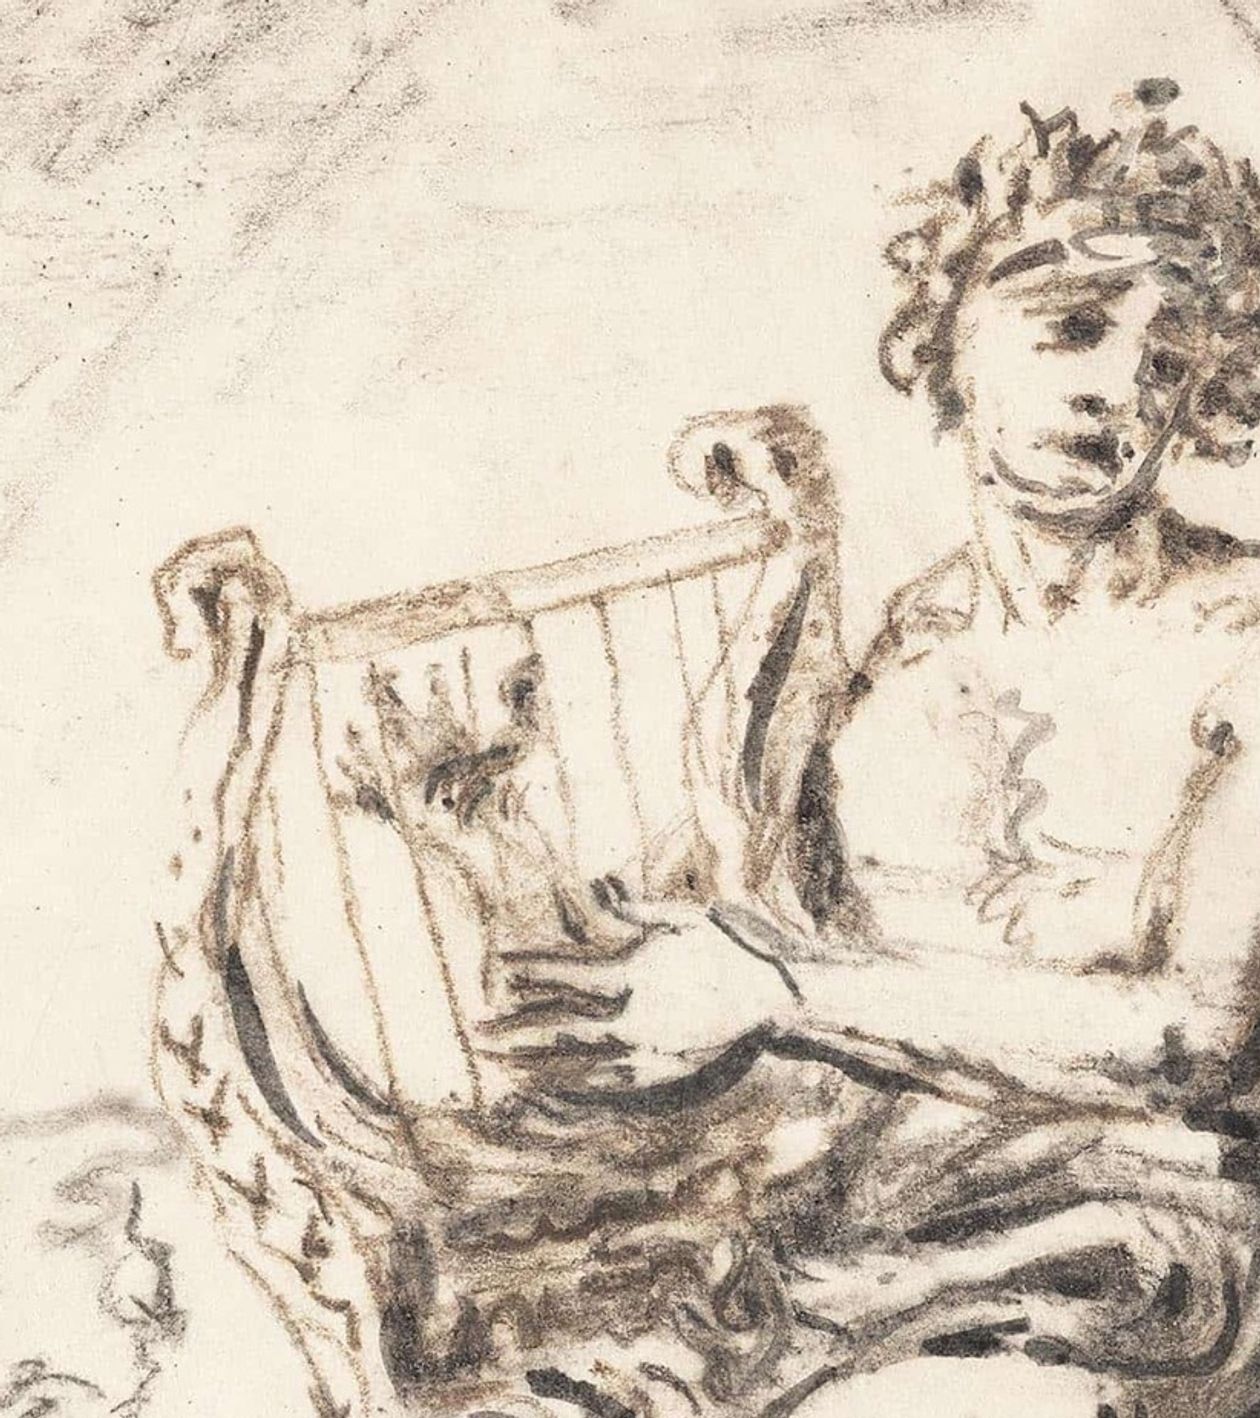 Charcoal sketch on paper by De Chirico of Orpheus playing the lyra, sitting by a tree.